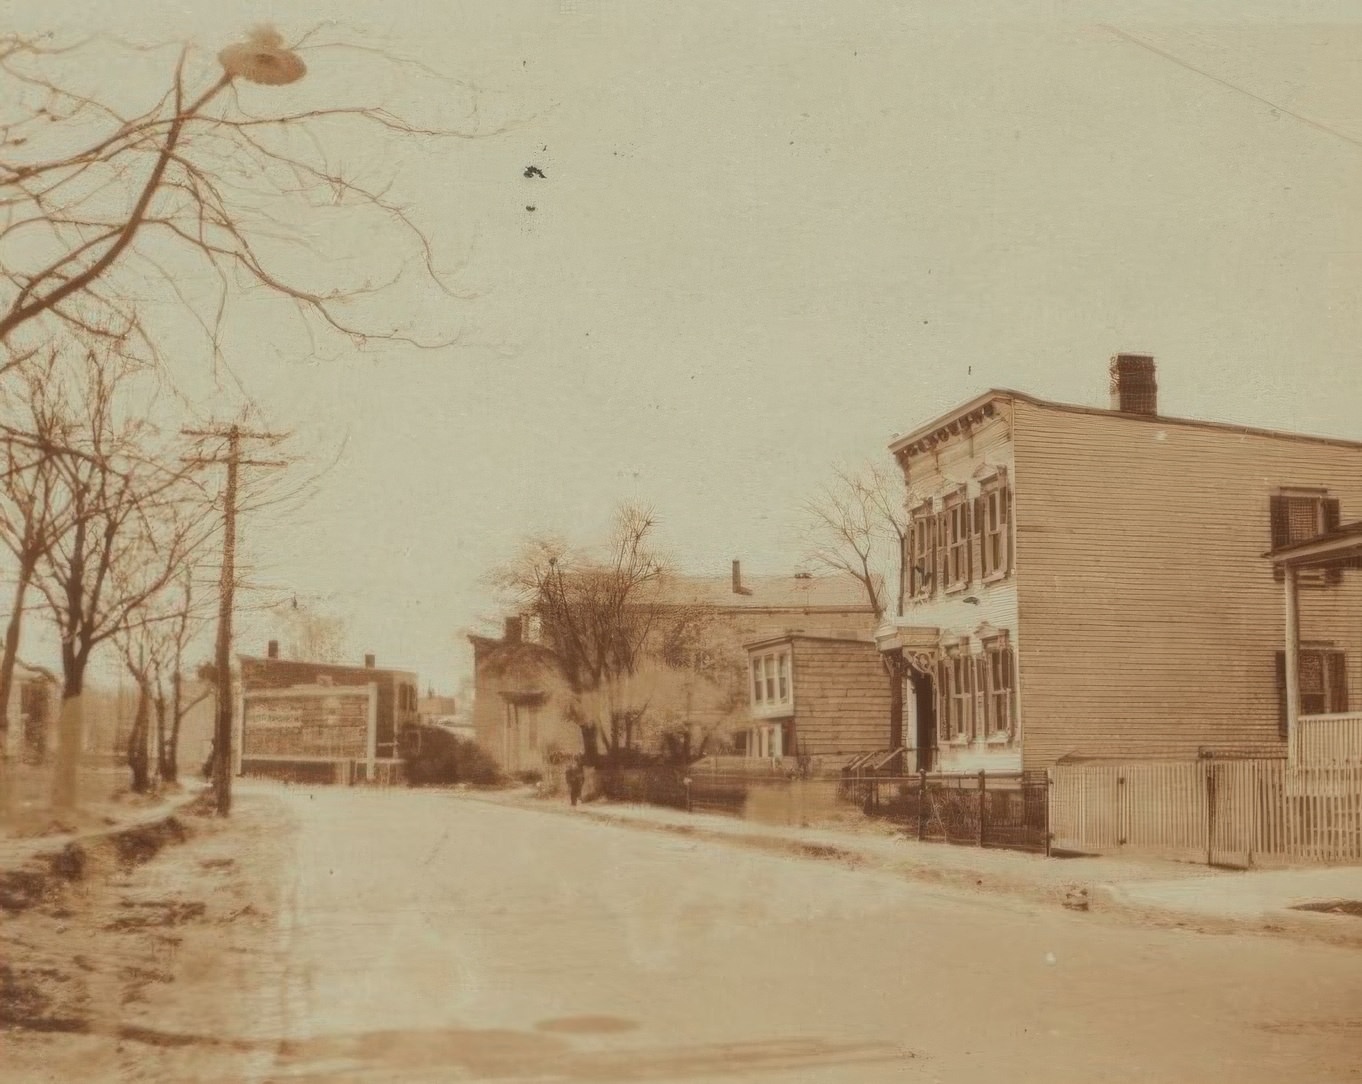 Cooper Avenue And 59Th Street, Queens, 1900S.